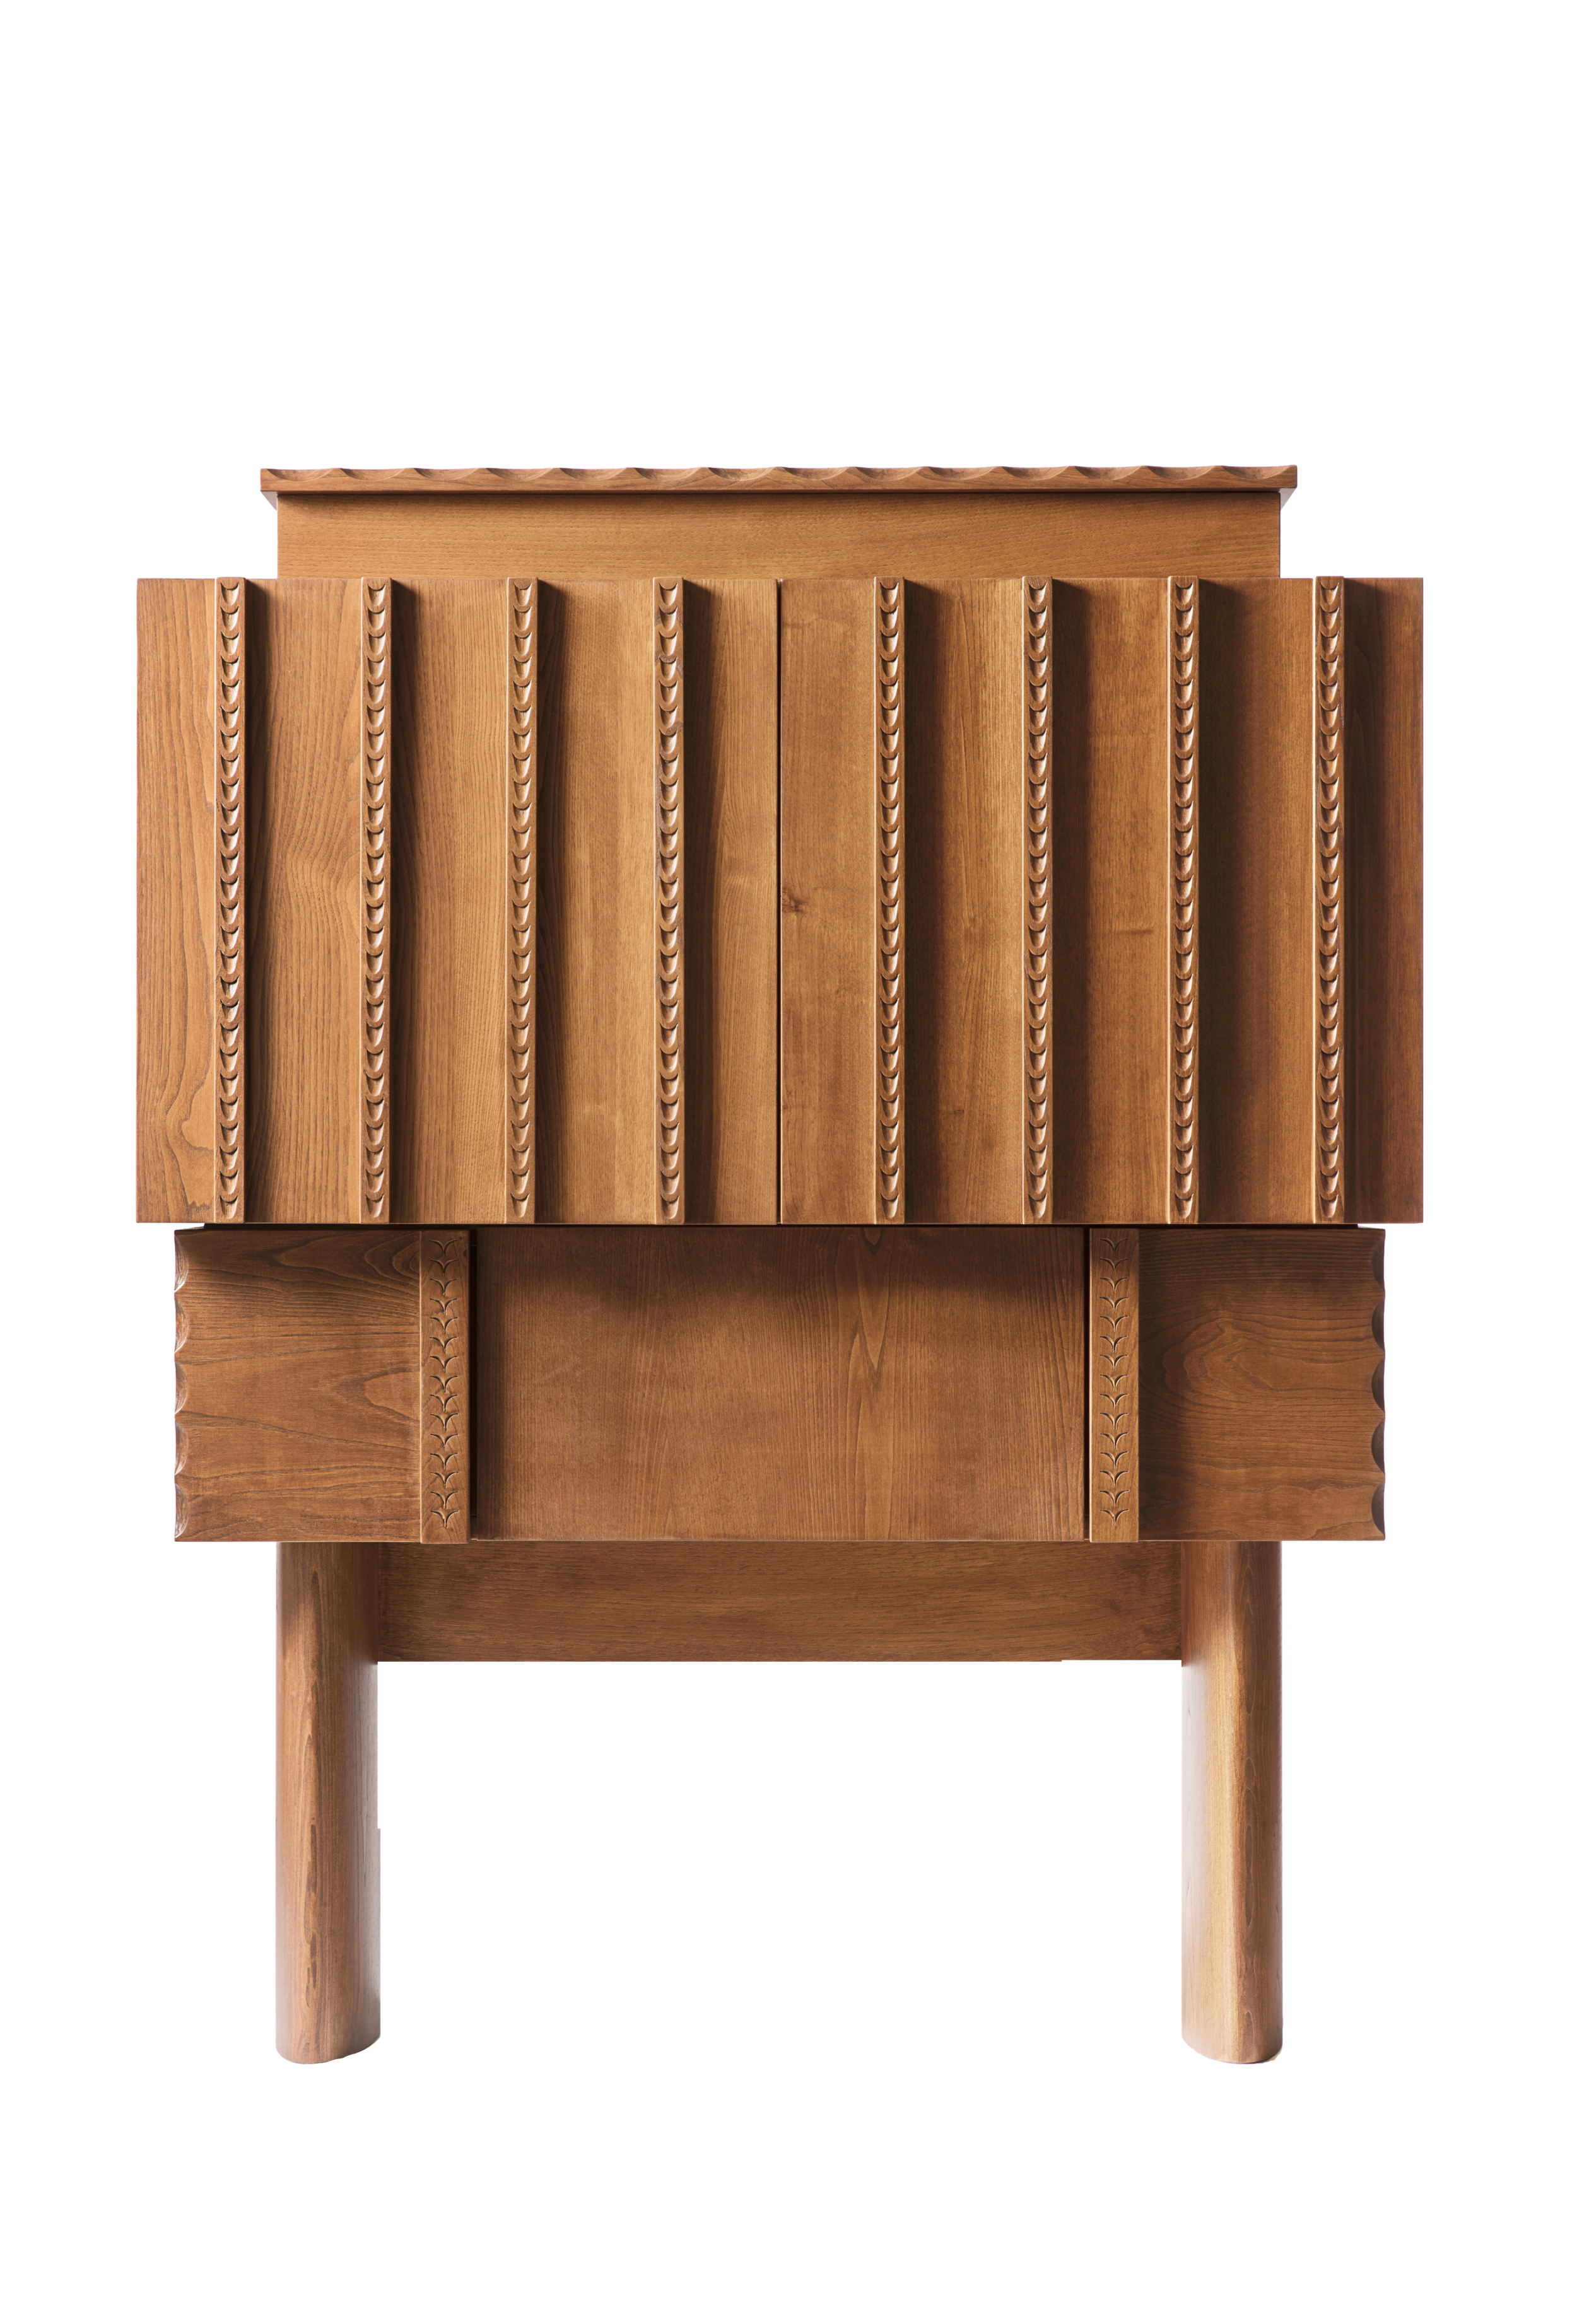 Ancas Sideboard, designed by Chiara Andreatti, made by Pierpaolo Mandis for Pretziada_front copy.png